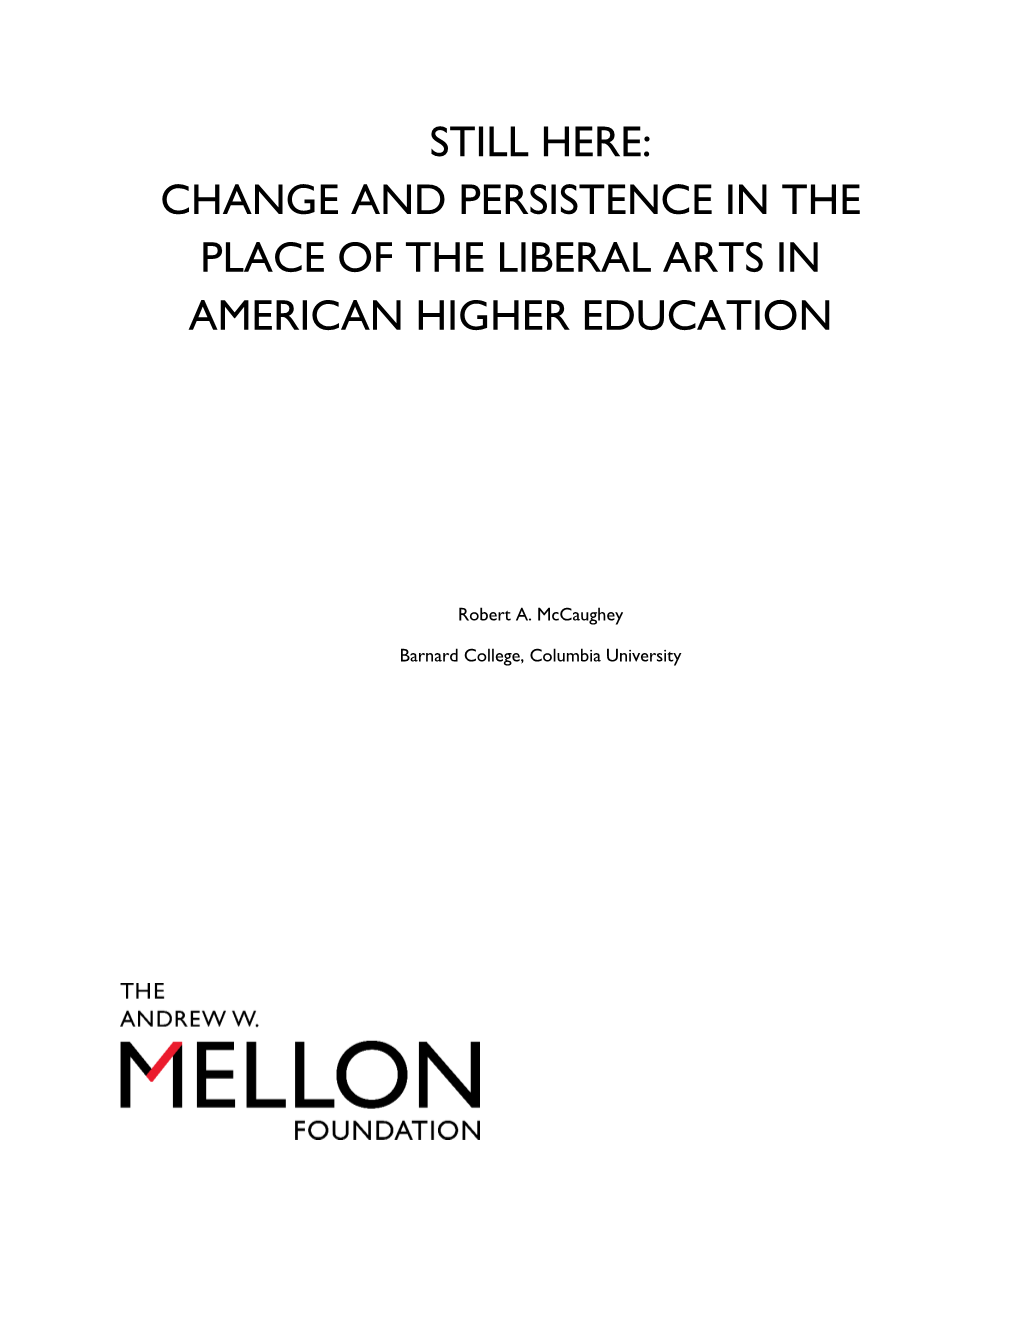 Change and Persistence in the Place of the Liberal Arts in American Higher Education